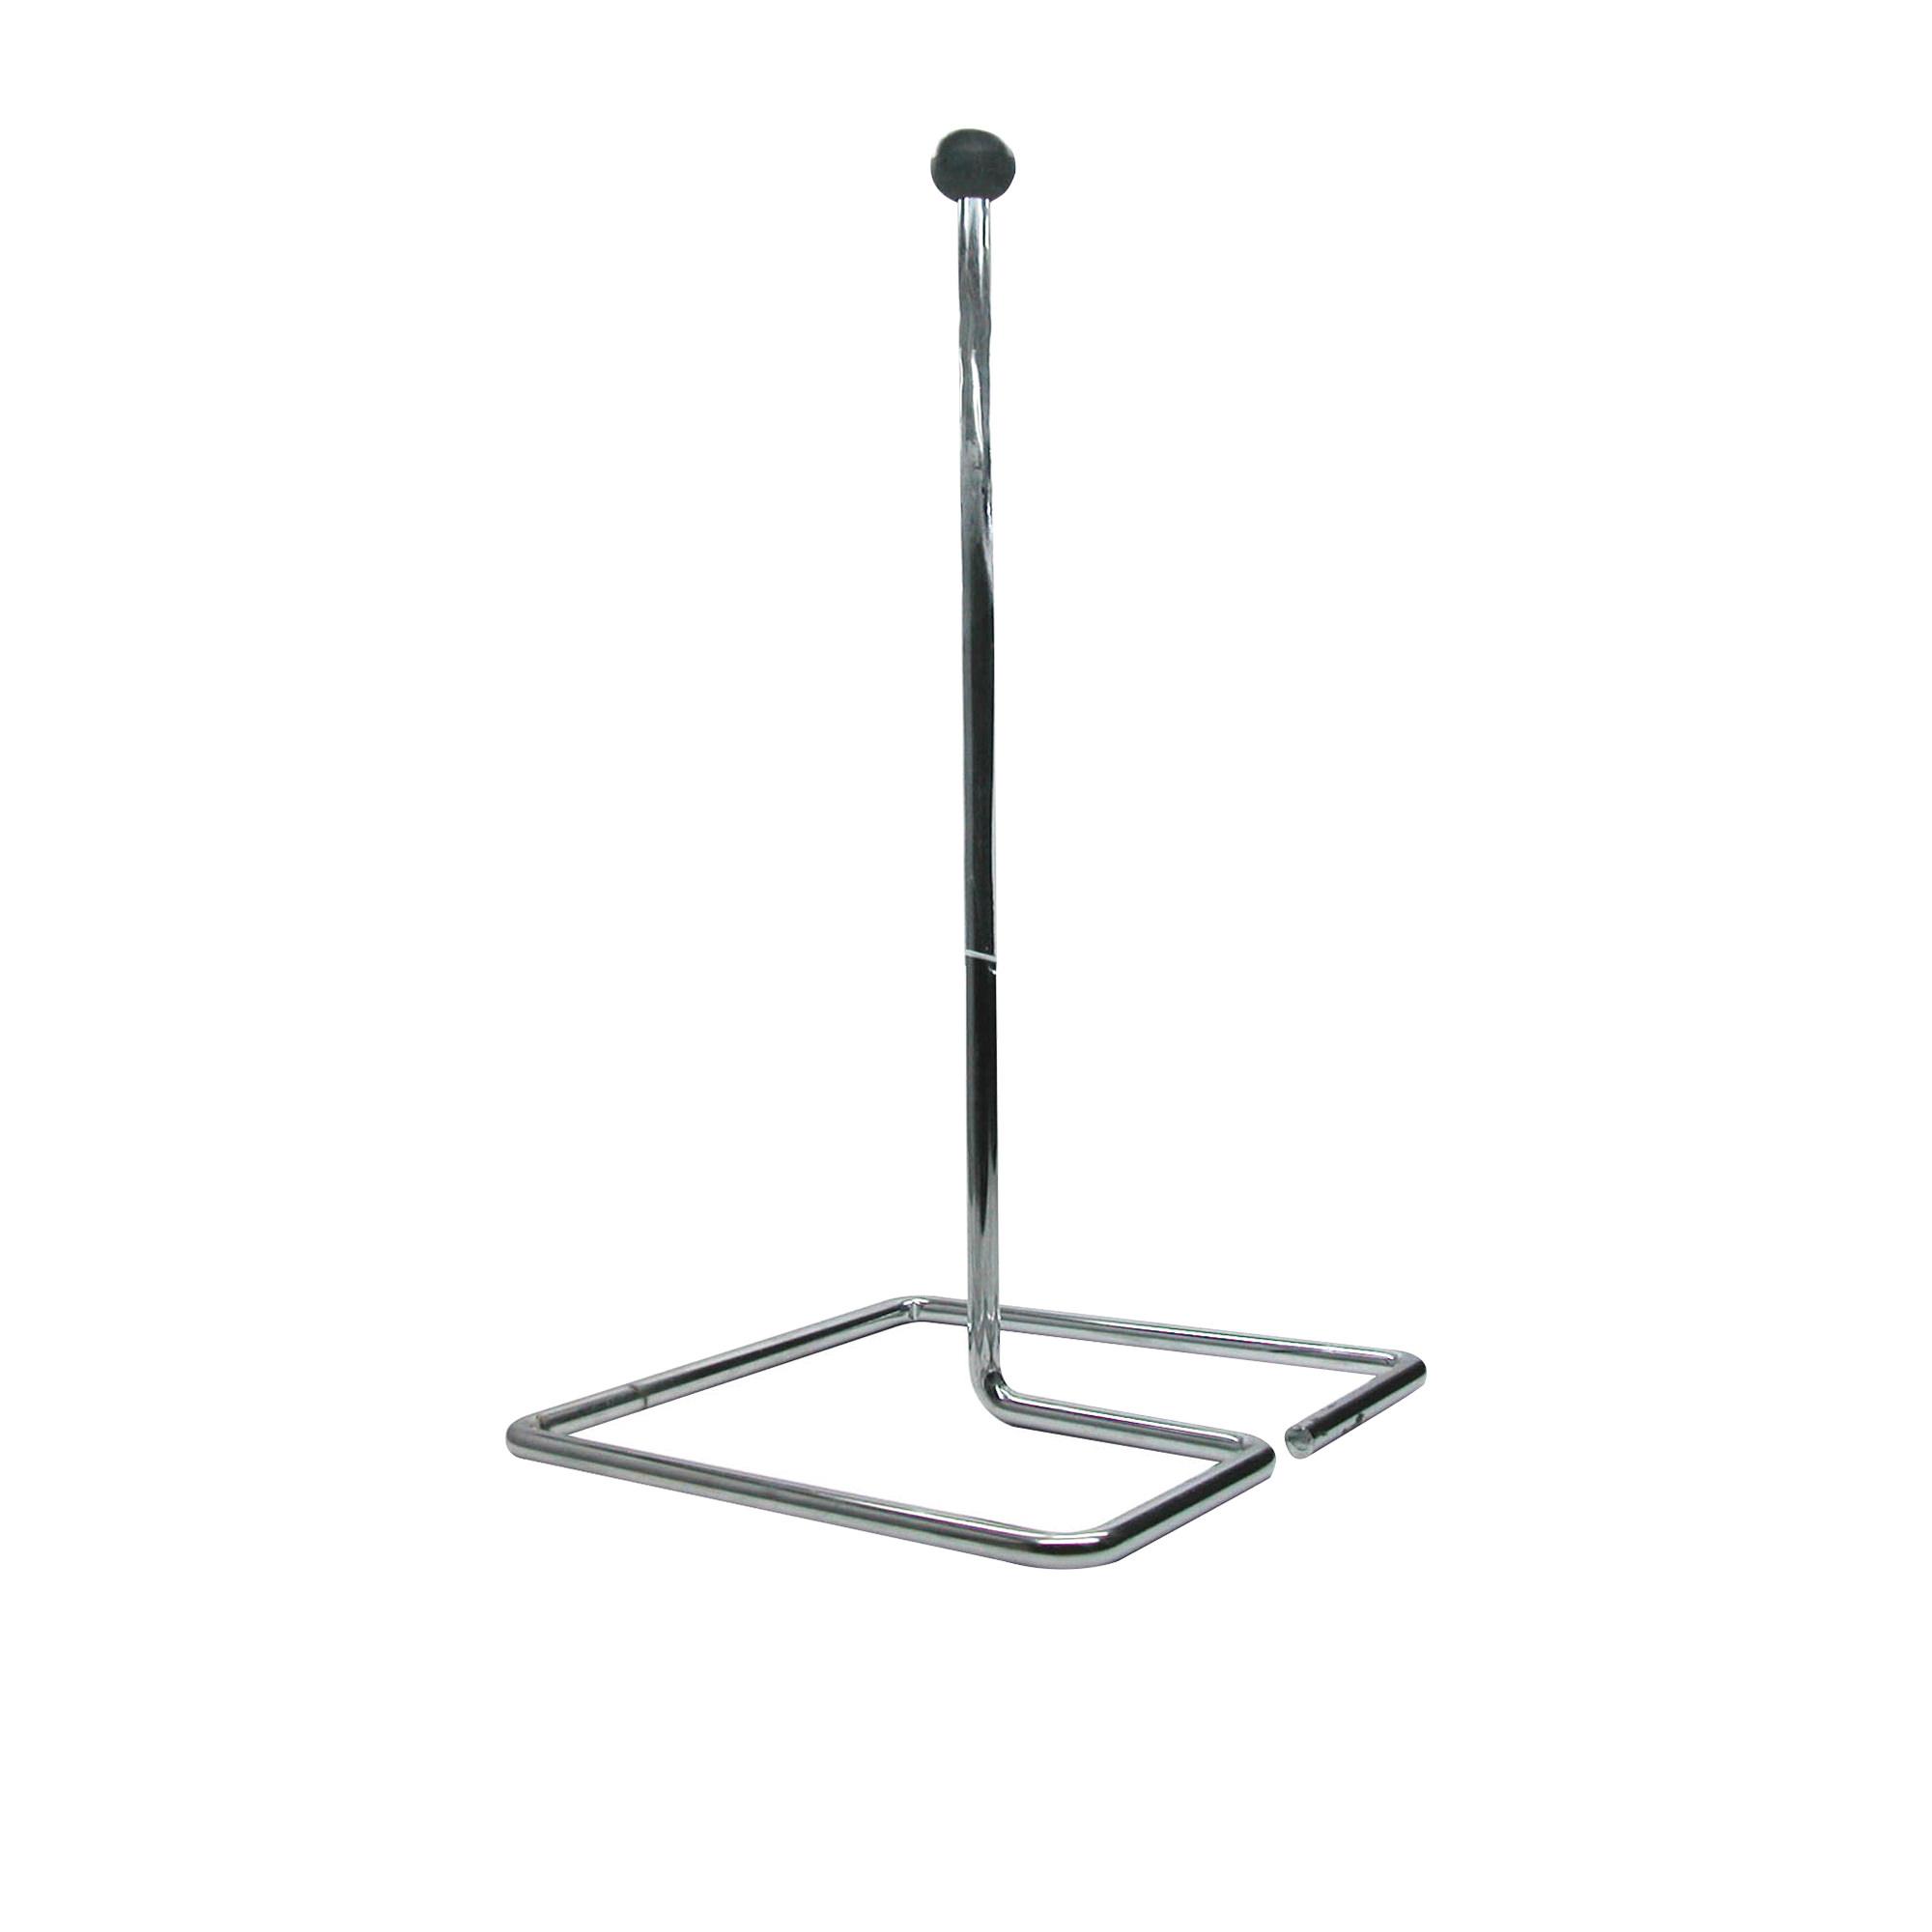 Winex Decanter Drying Stand Image 1